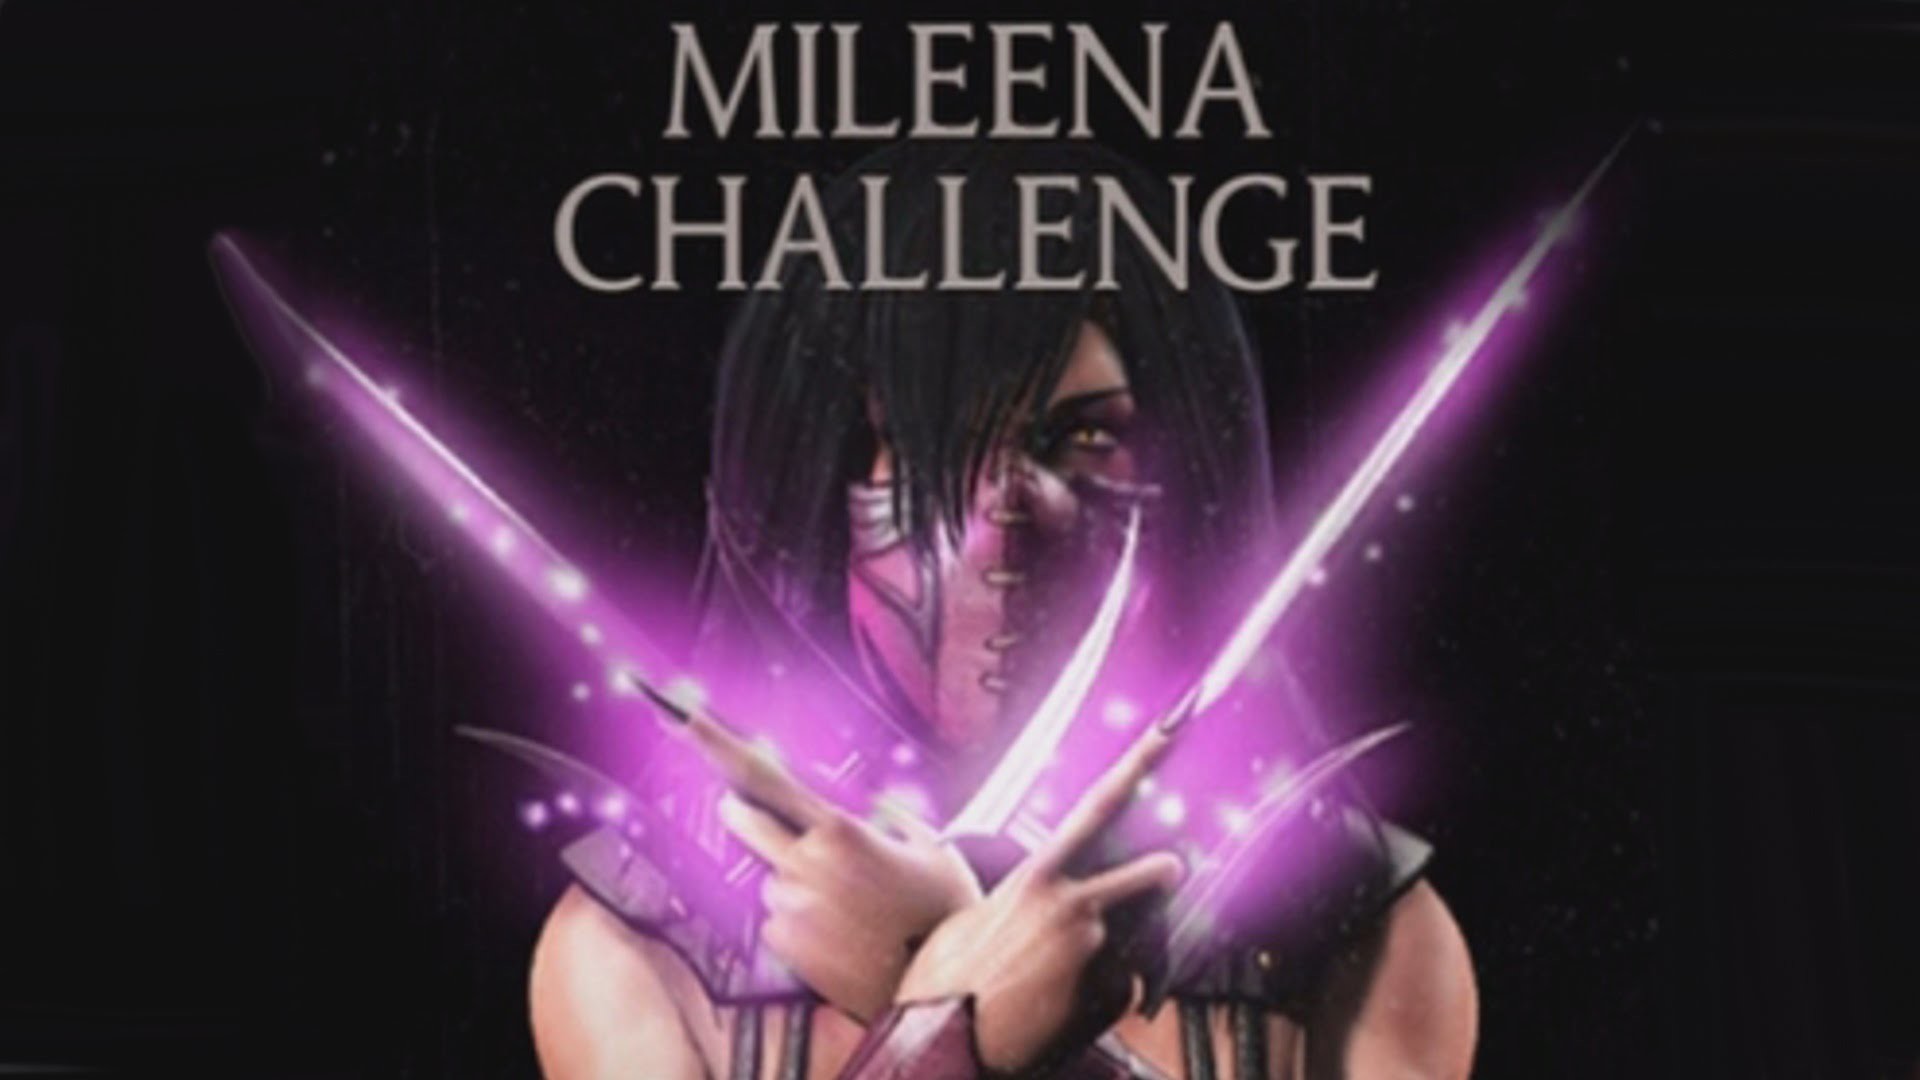 1920x1080 Mortal Kombat X (iOS/Android) MILEENA CHALLENGE Lets play Gameplay - YouTube